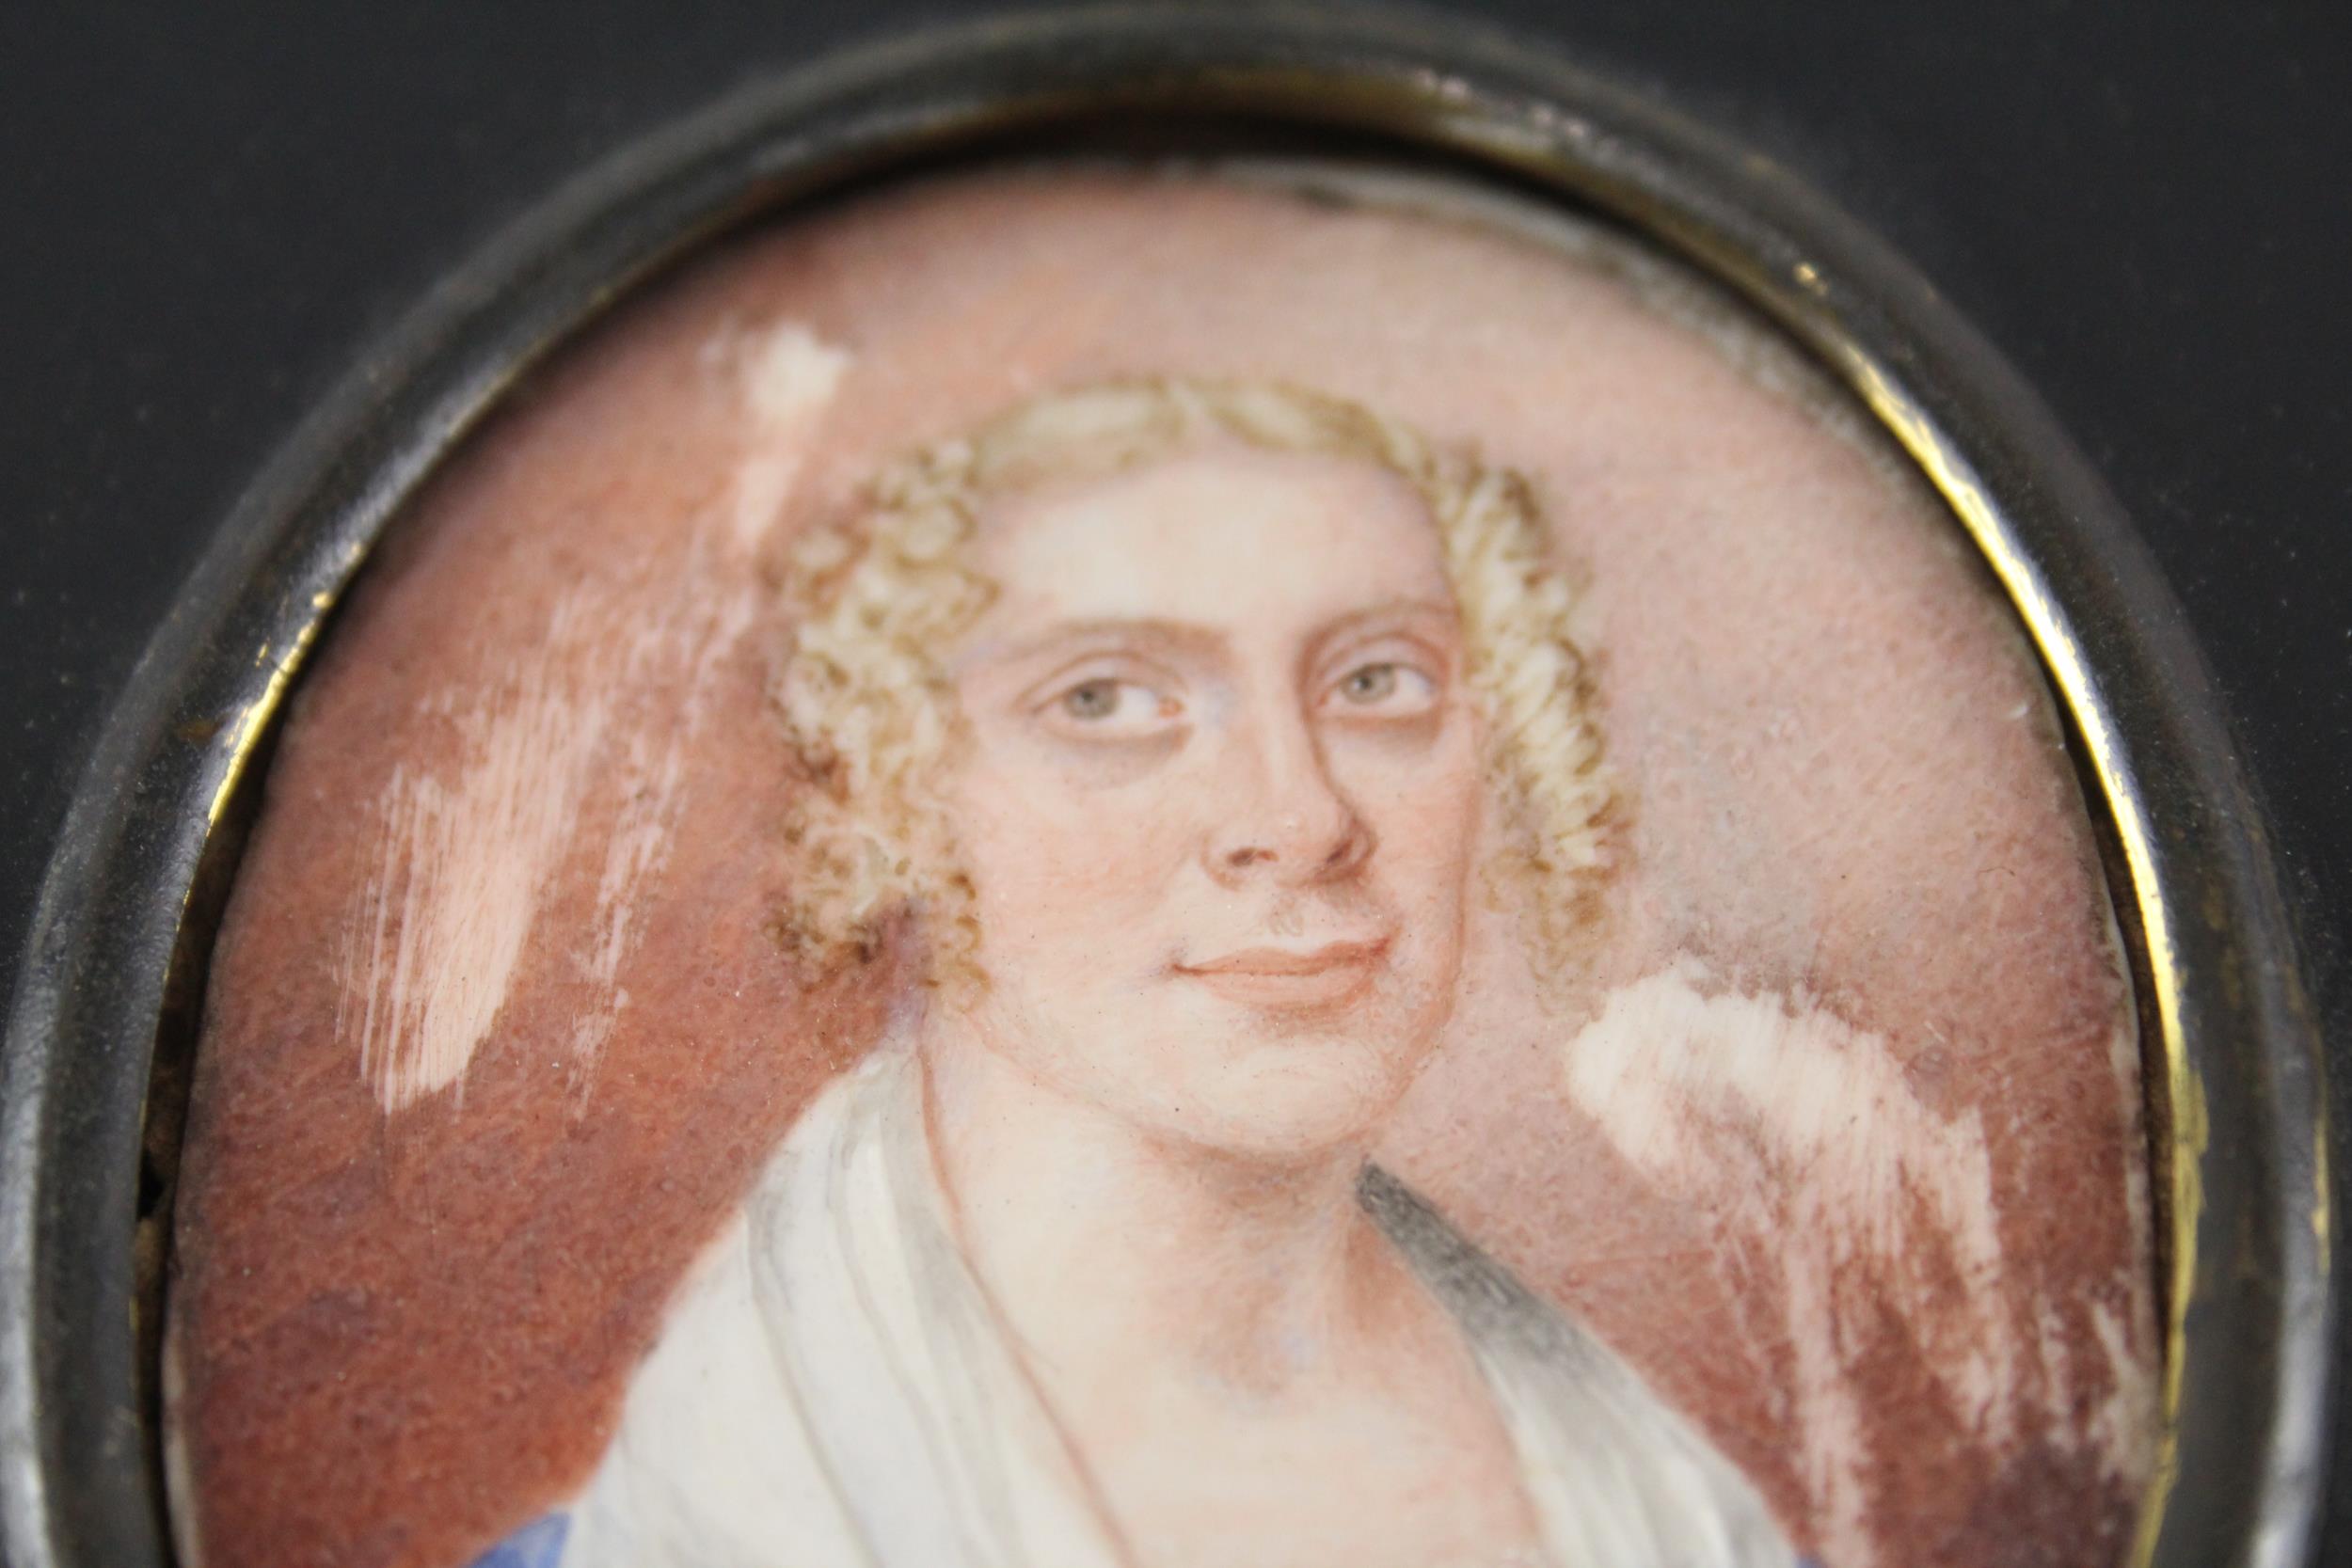 2 x Antique Hand Drawn / Hand Painted Portraits - GLASS MISSING FROM ONE FRAME Items are in - Image 3 of 7